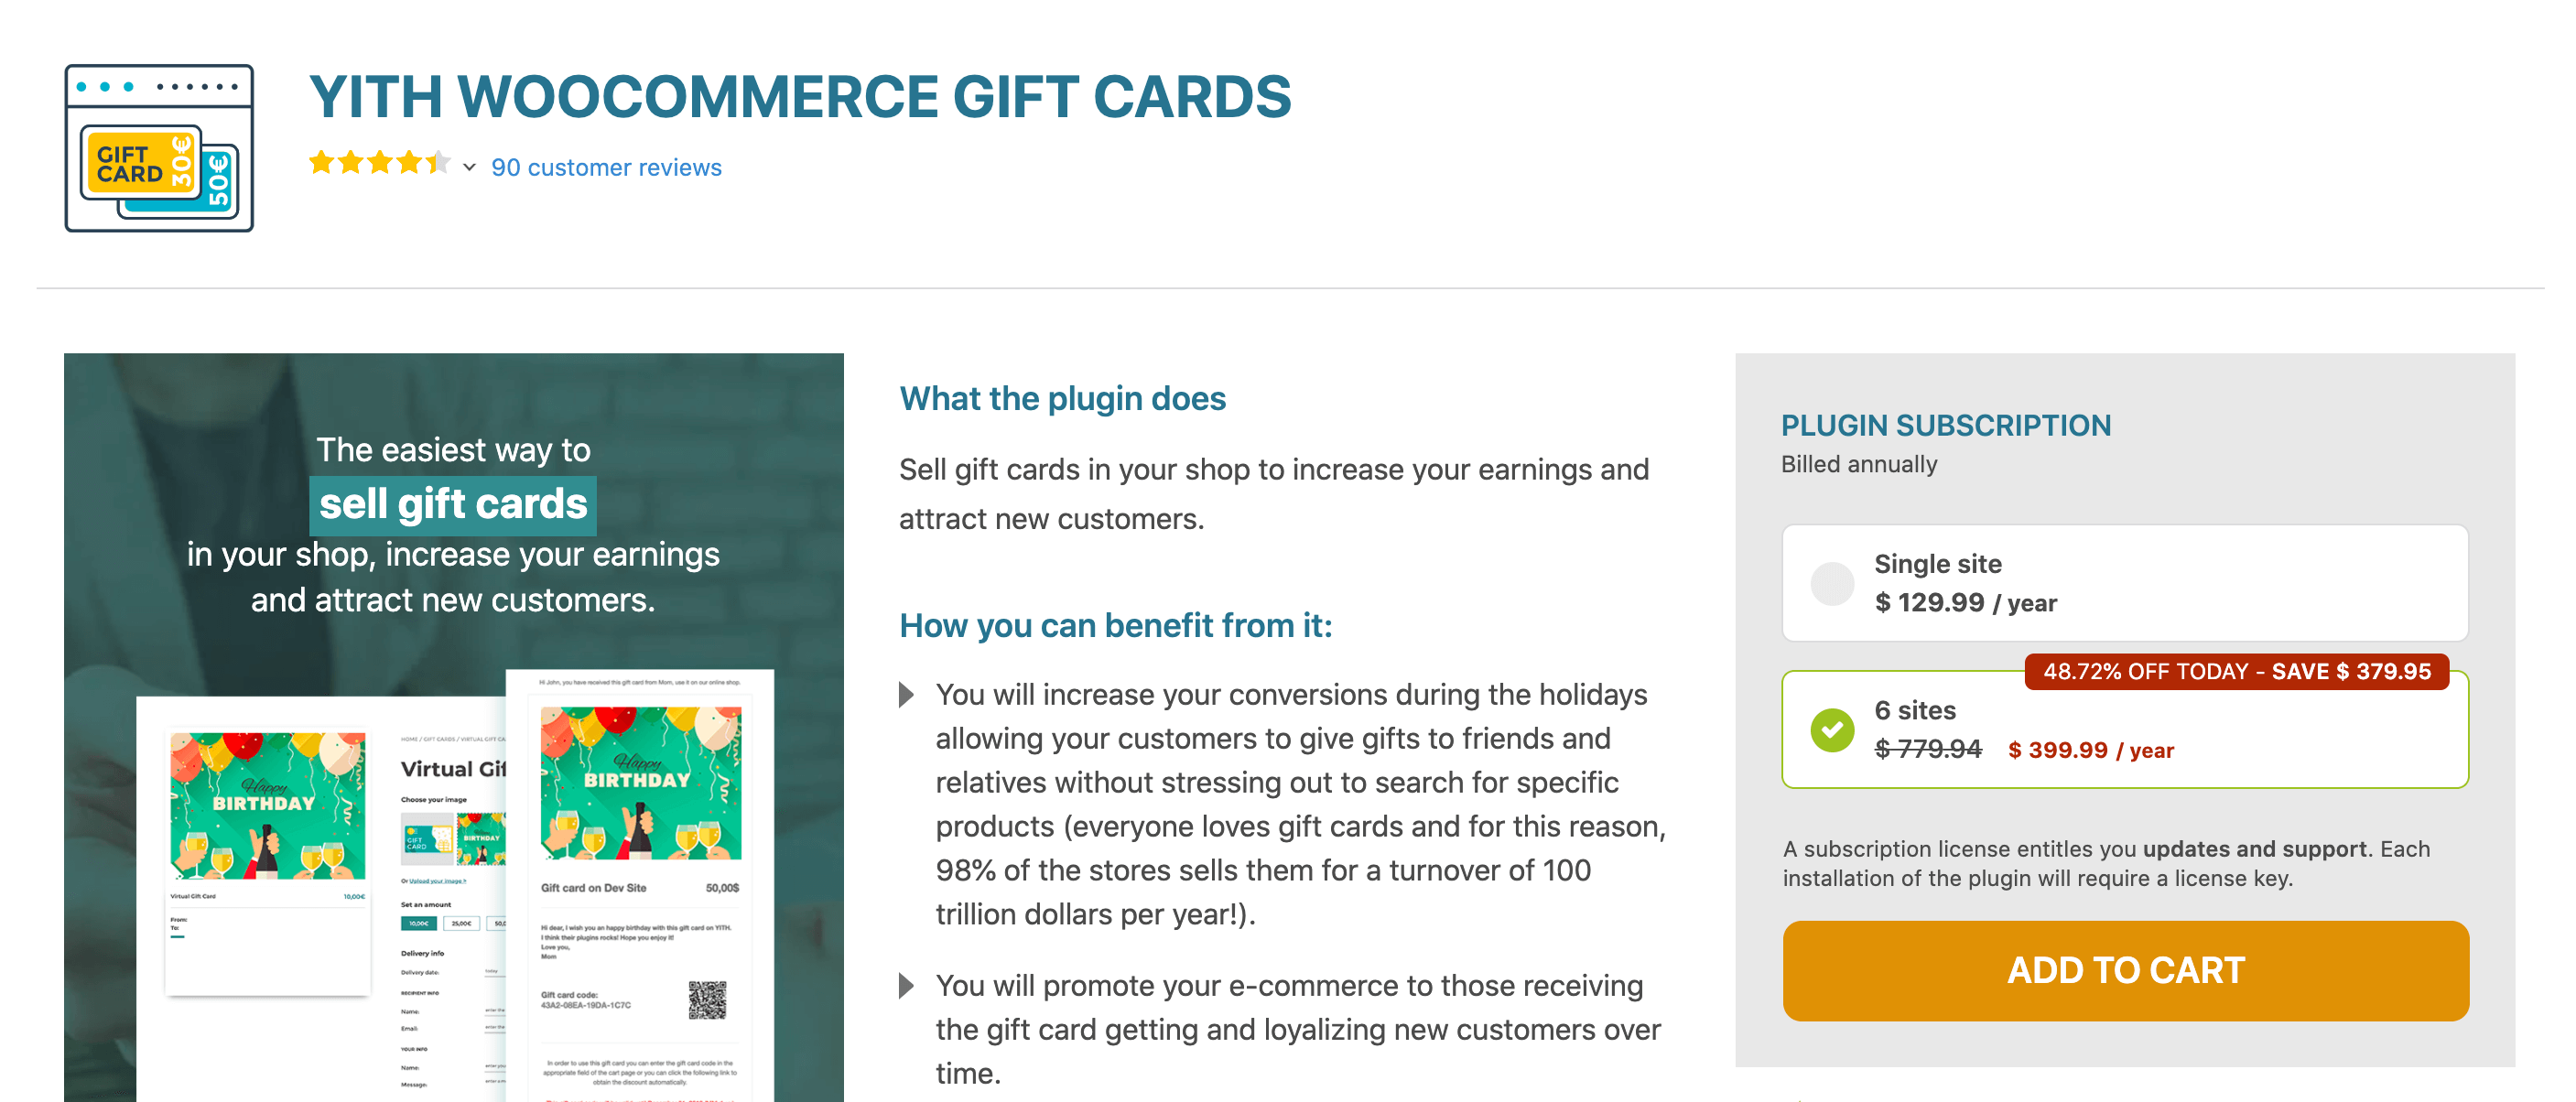 yit gift cards